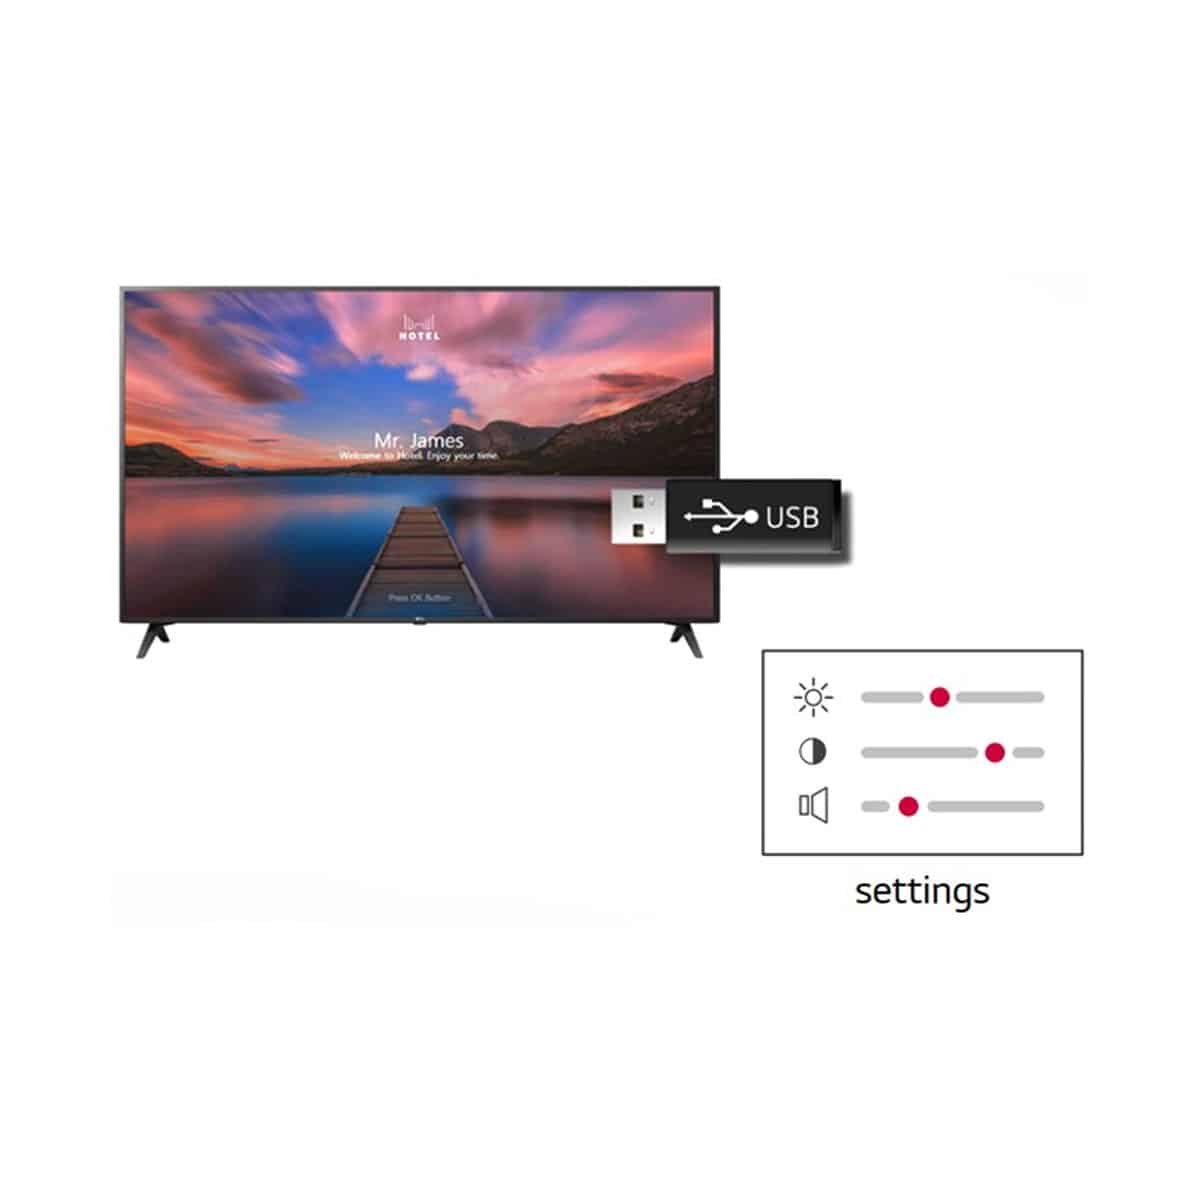 LG-50-Inch-Commercial-TV-Specifications-USB